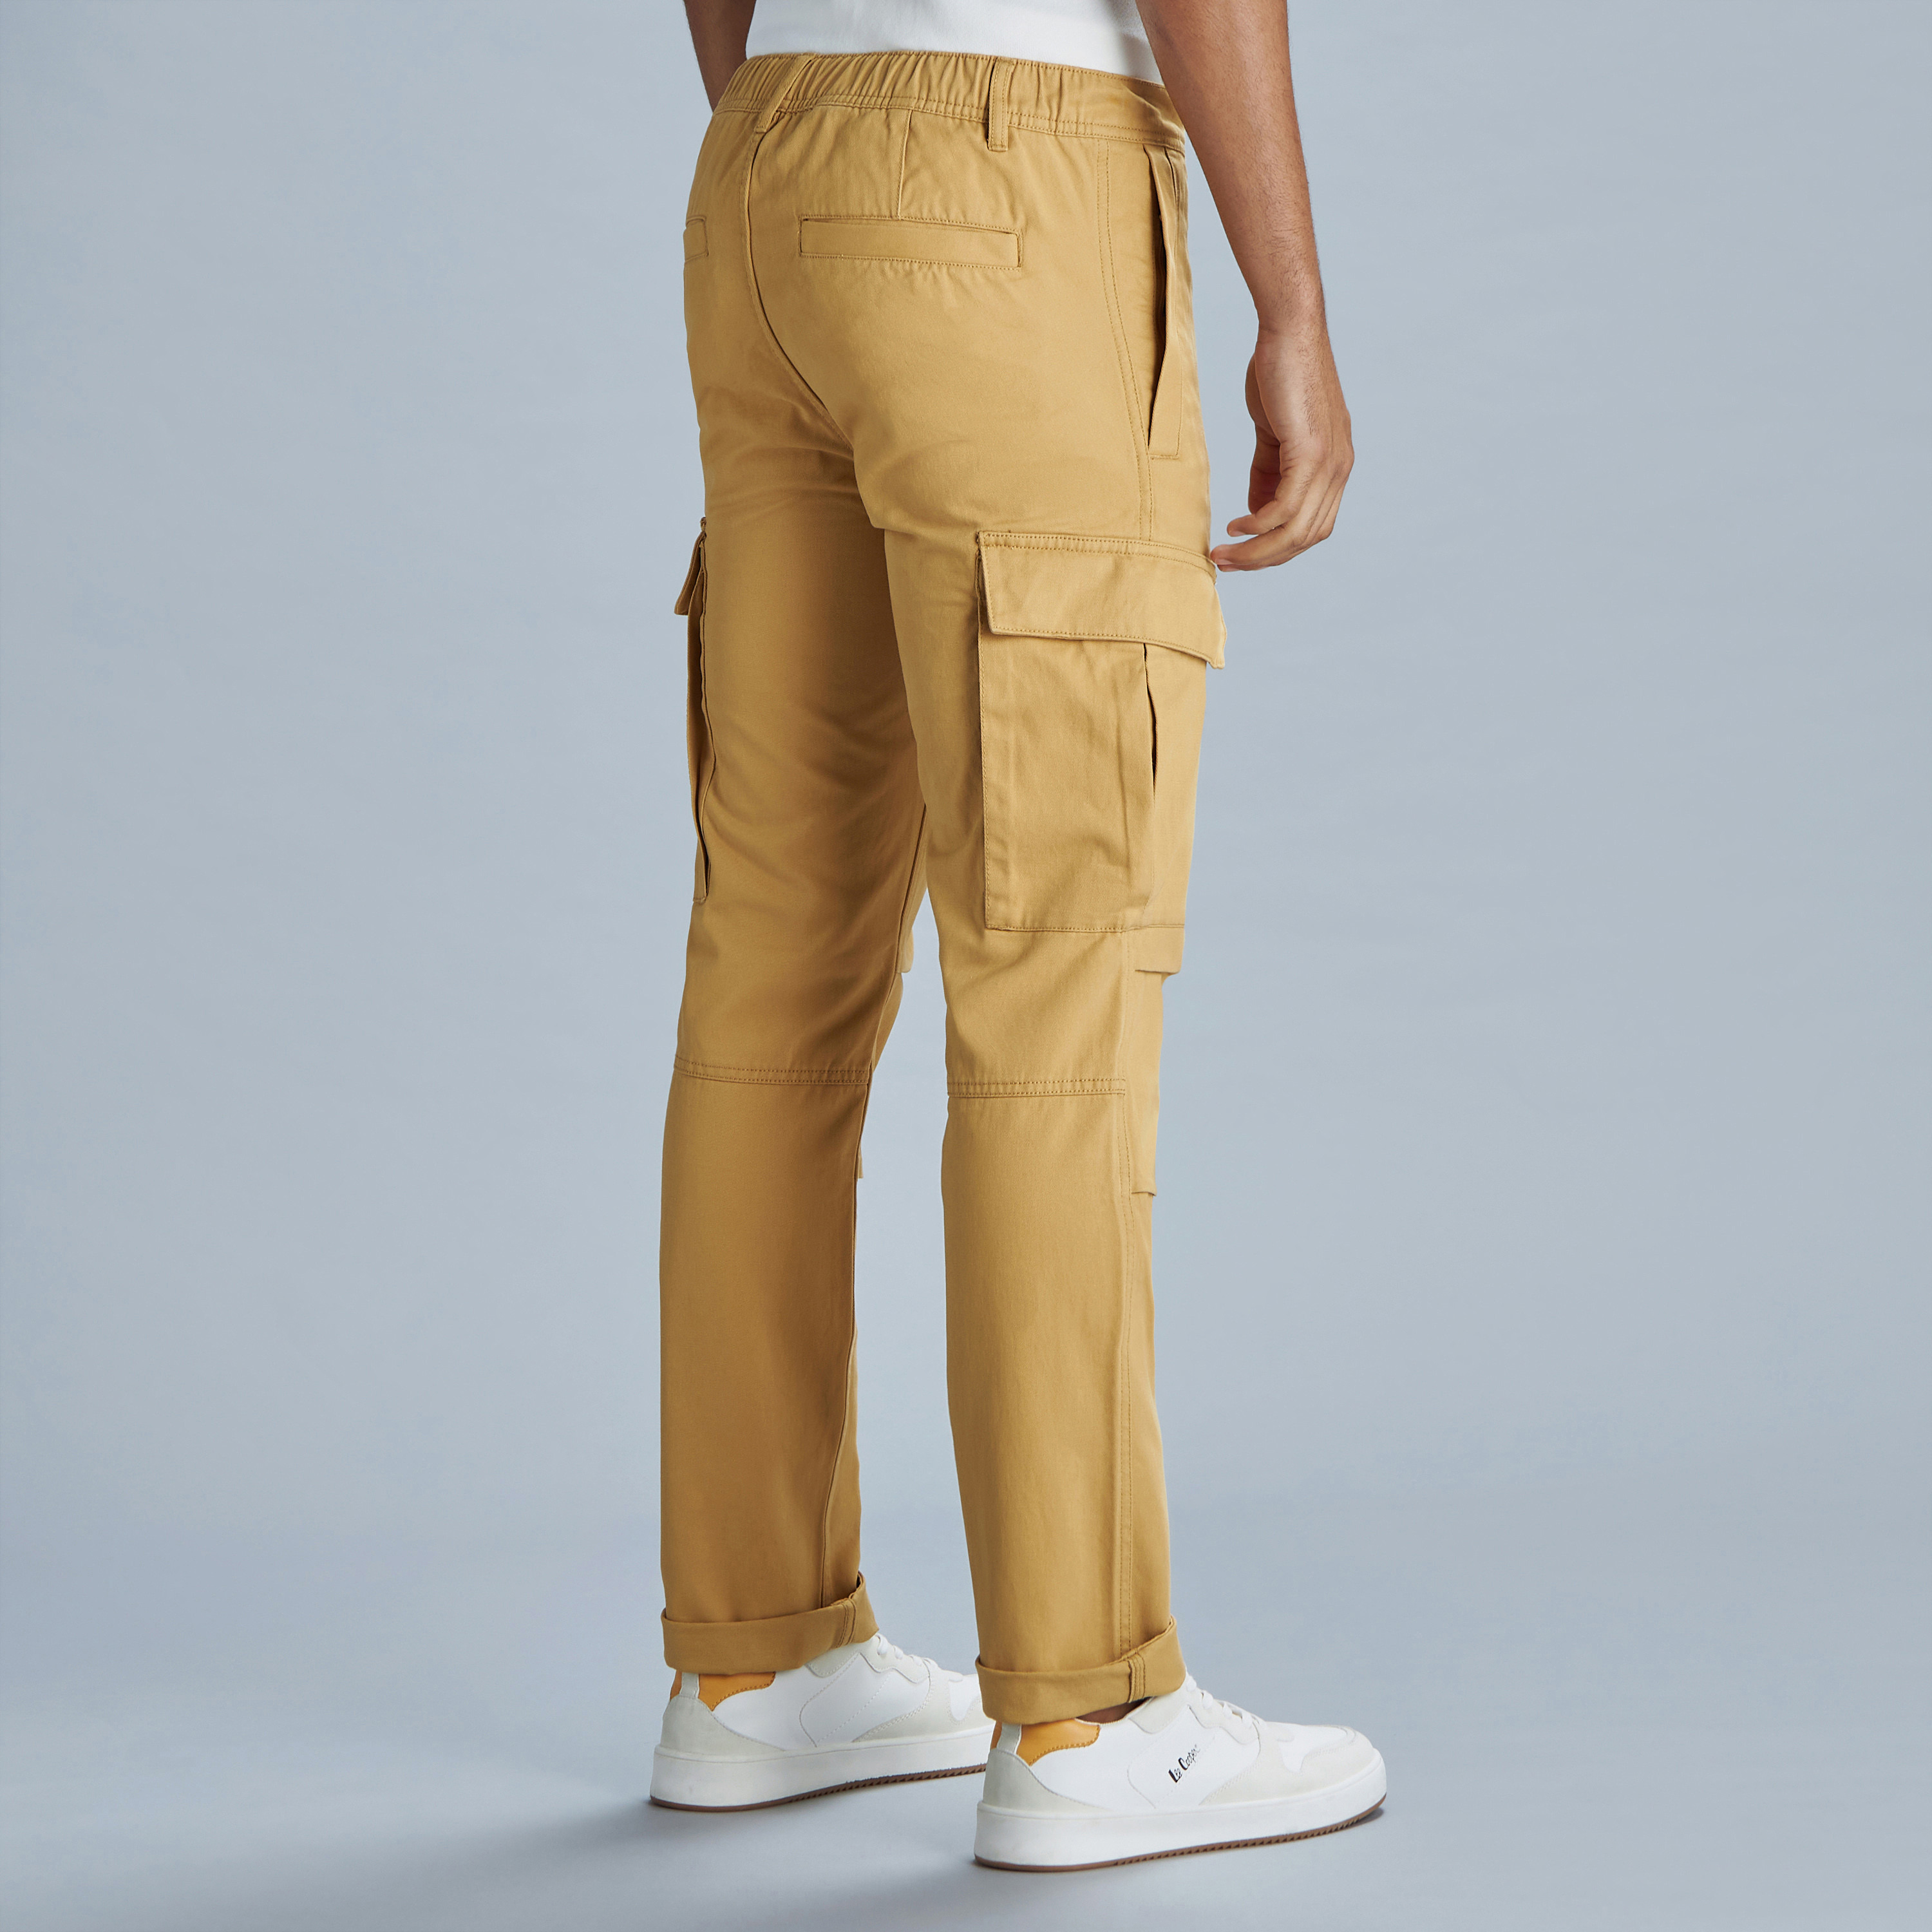 Shop Lee Cooper Trousers for Men up to 85% Off | DealDoodle